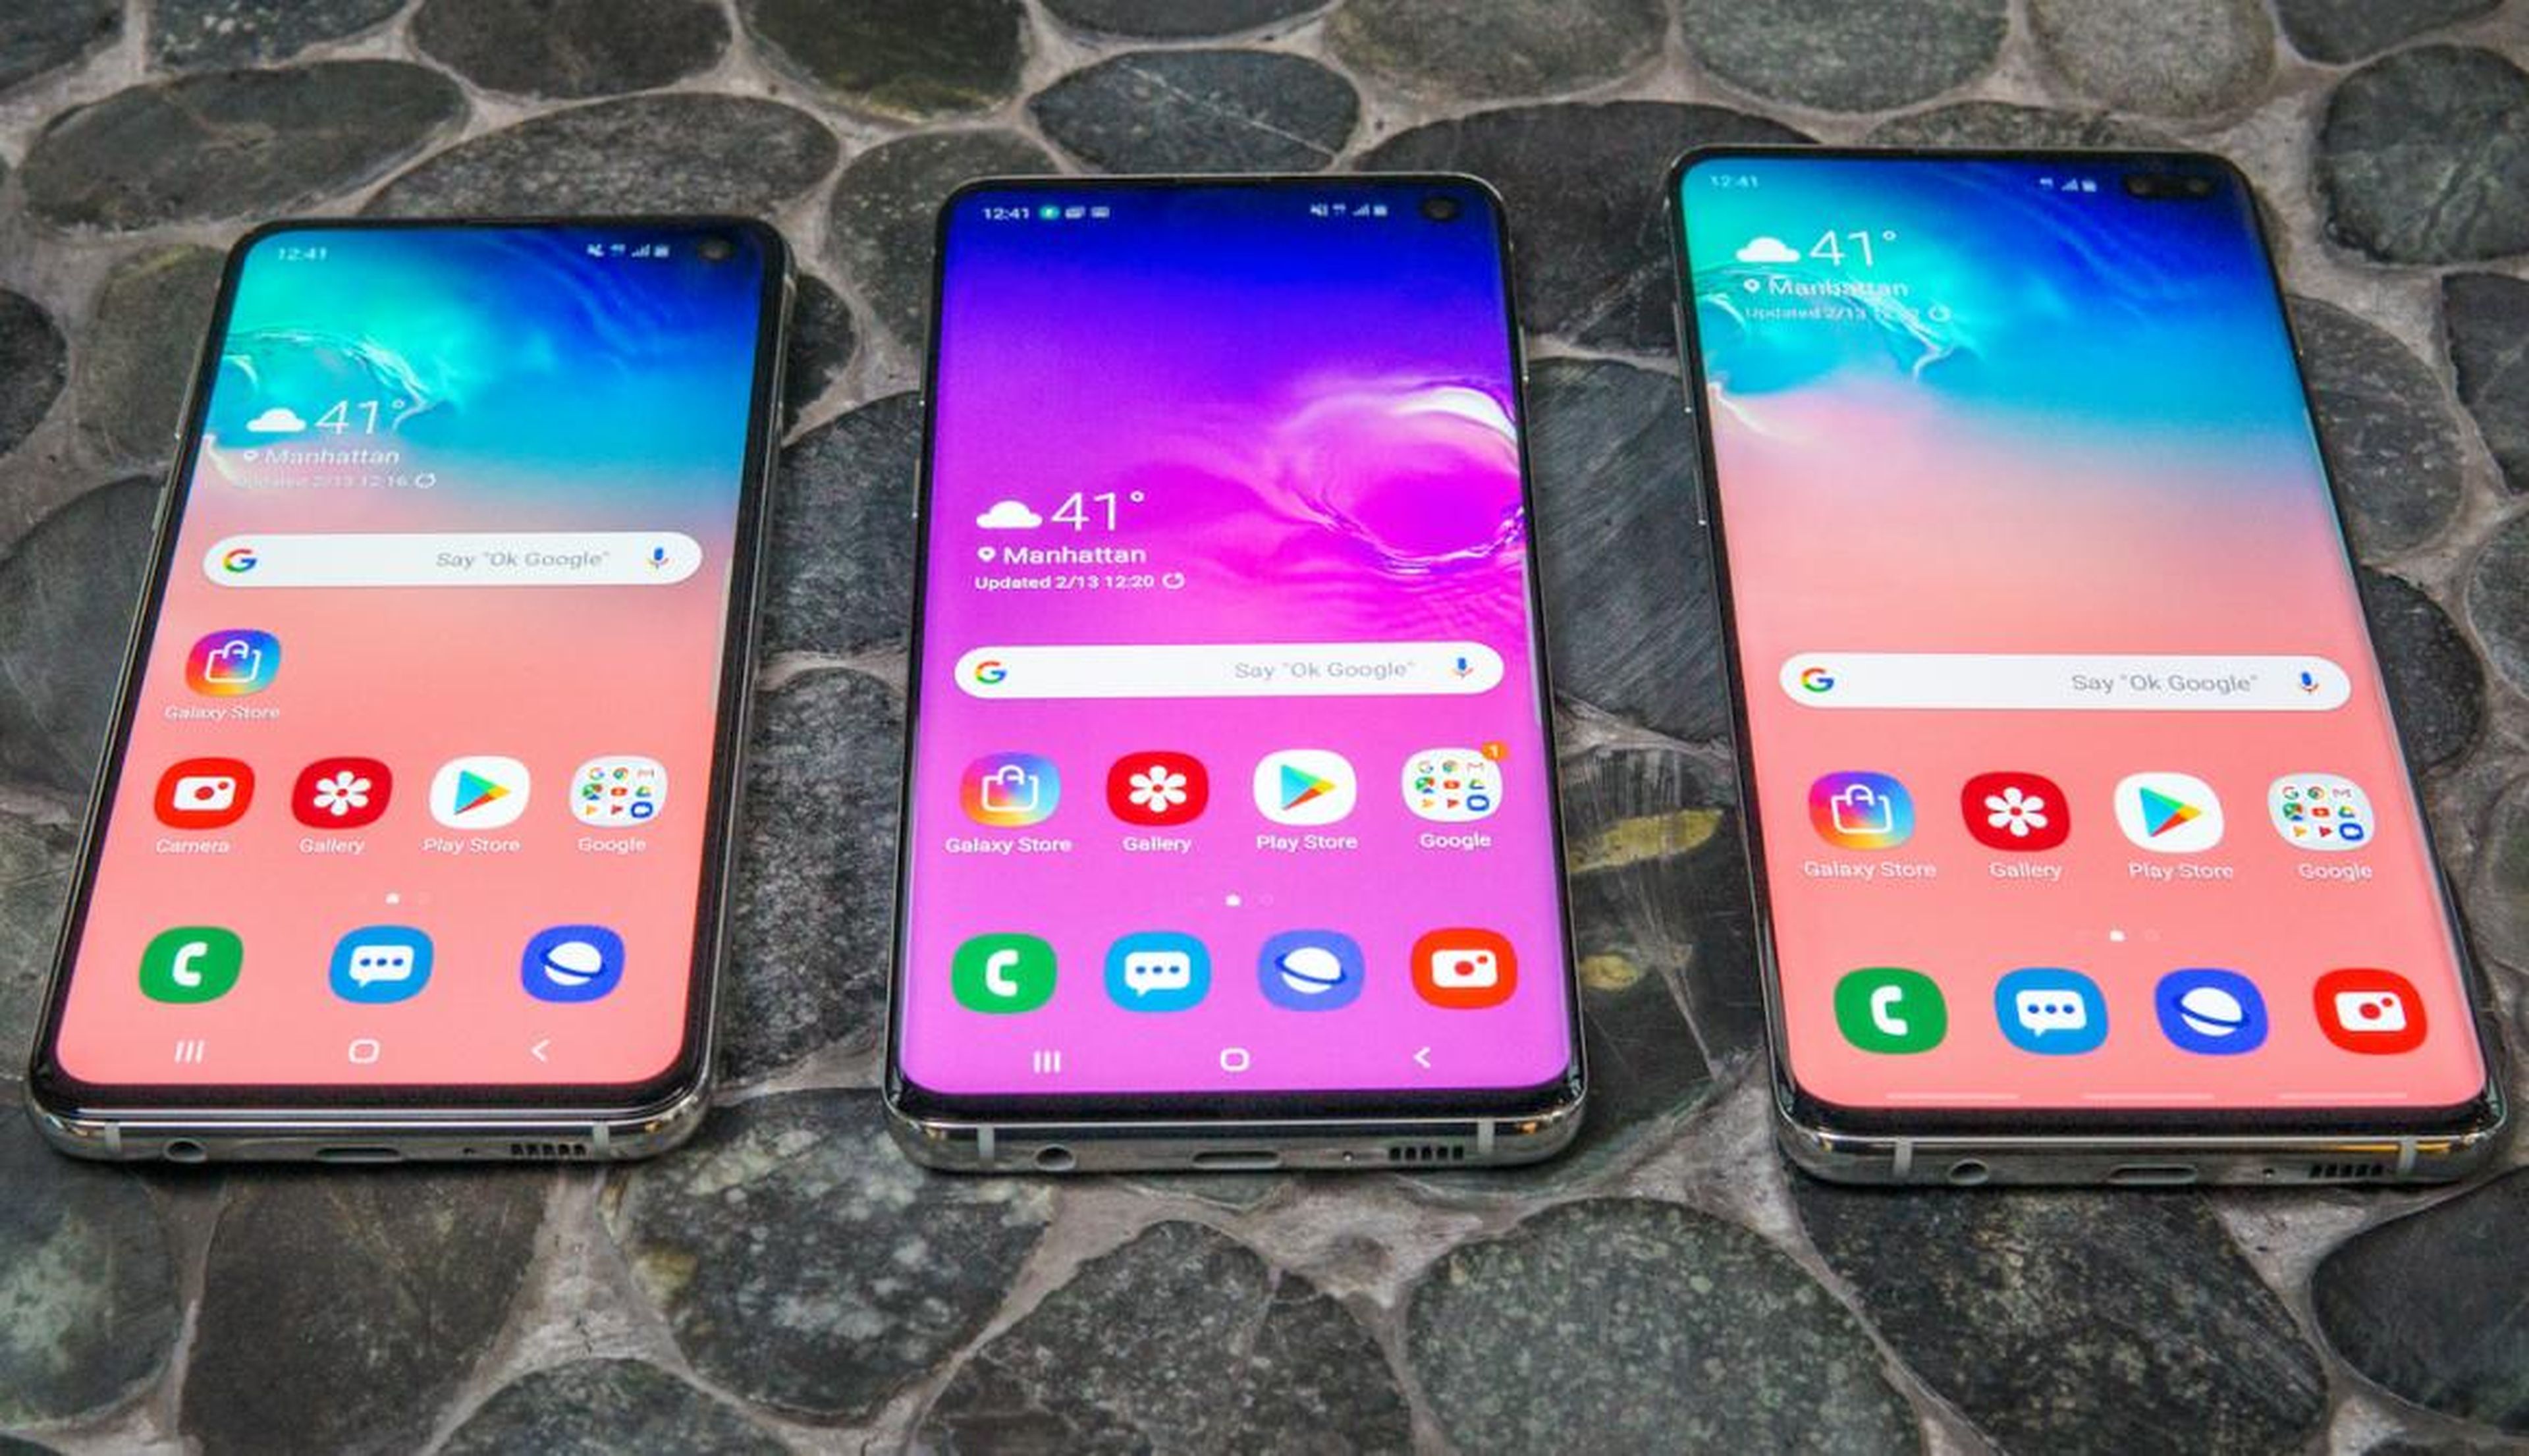 The Samsung Galaxy S10 is one of the few major smartphones you can still buy with a headphone jack